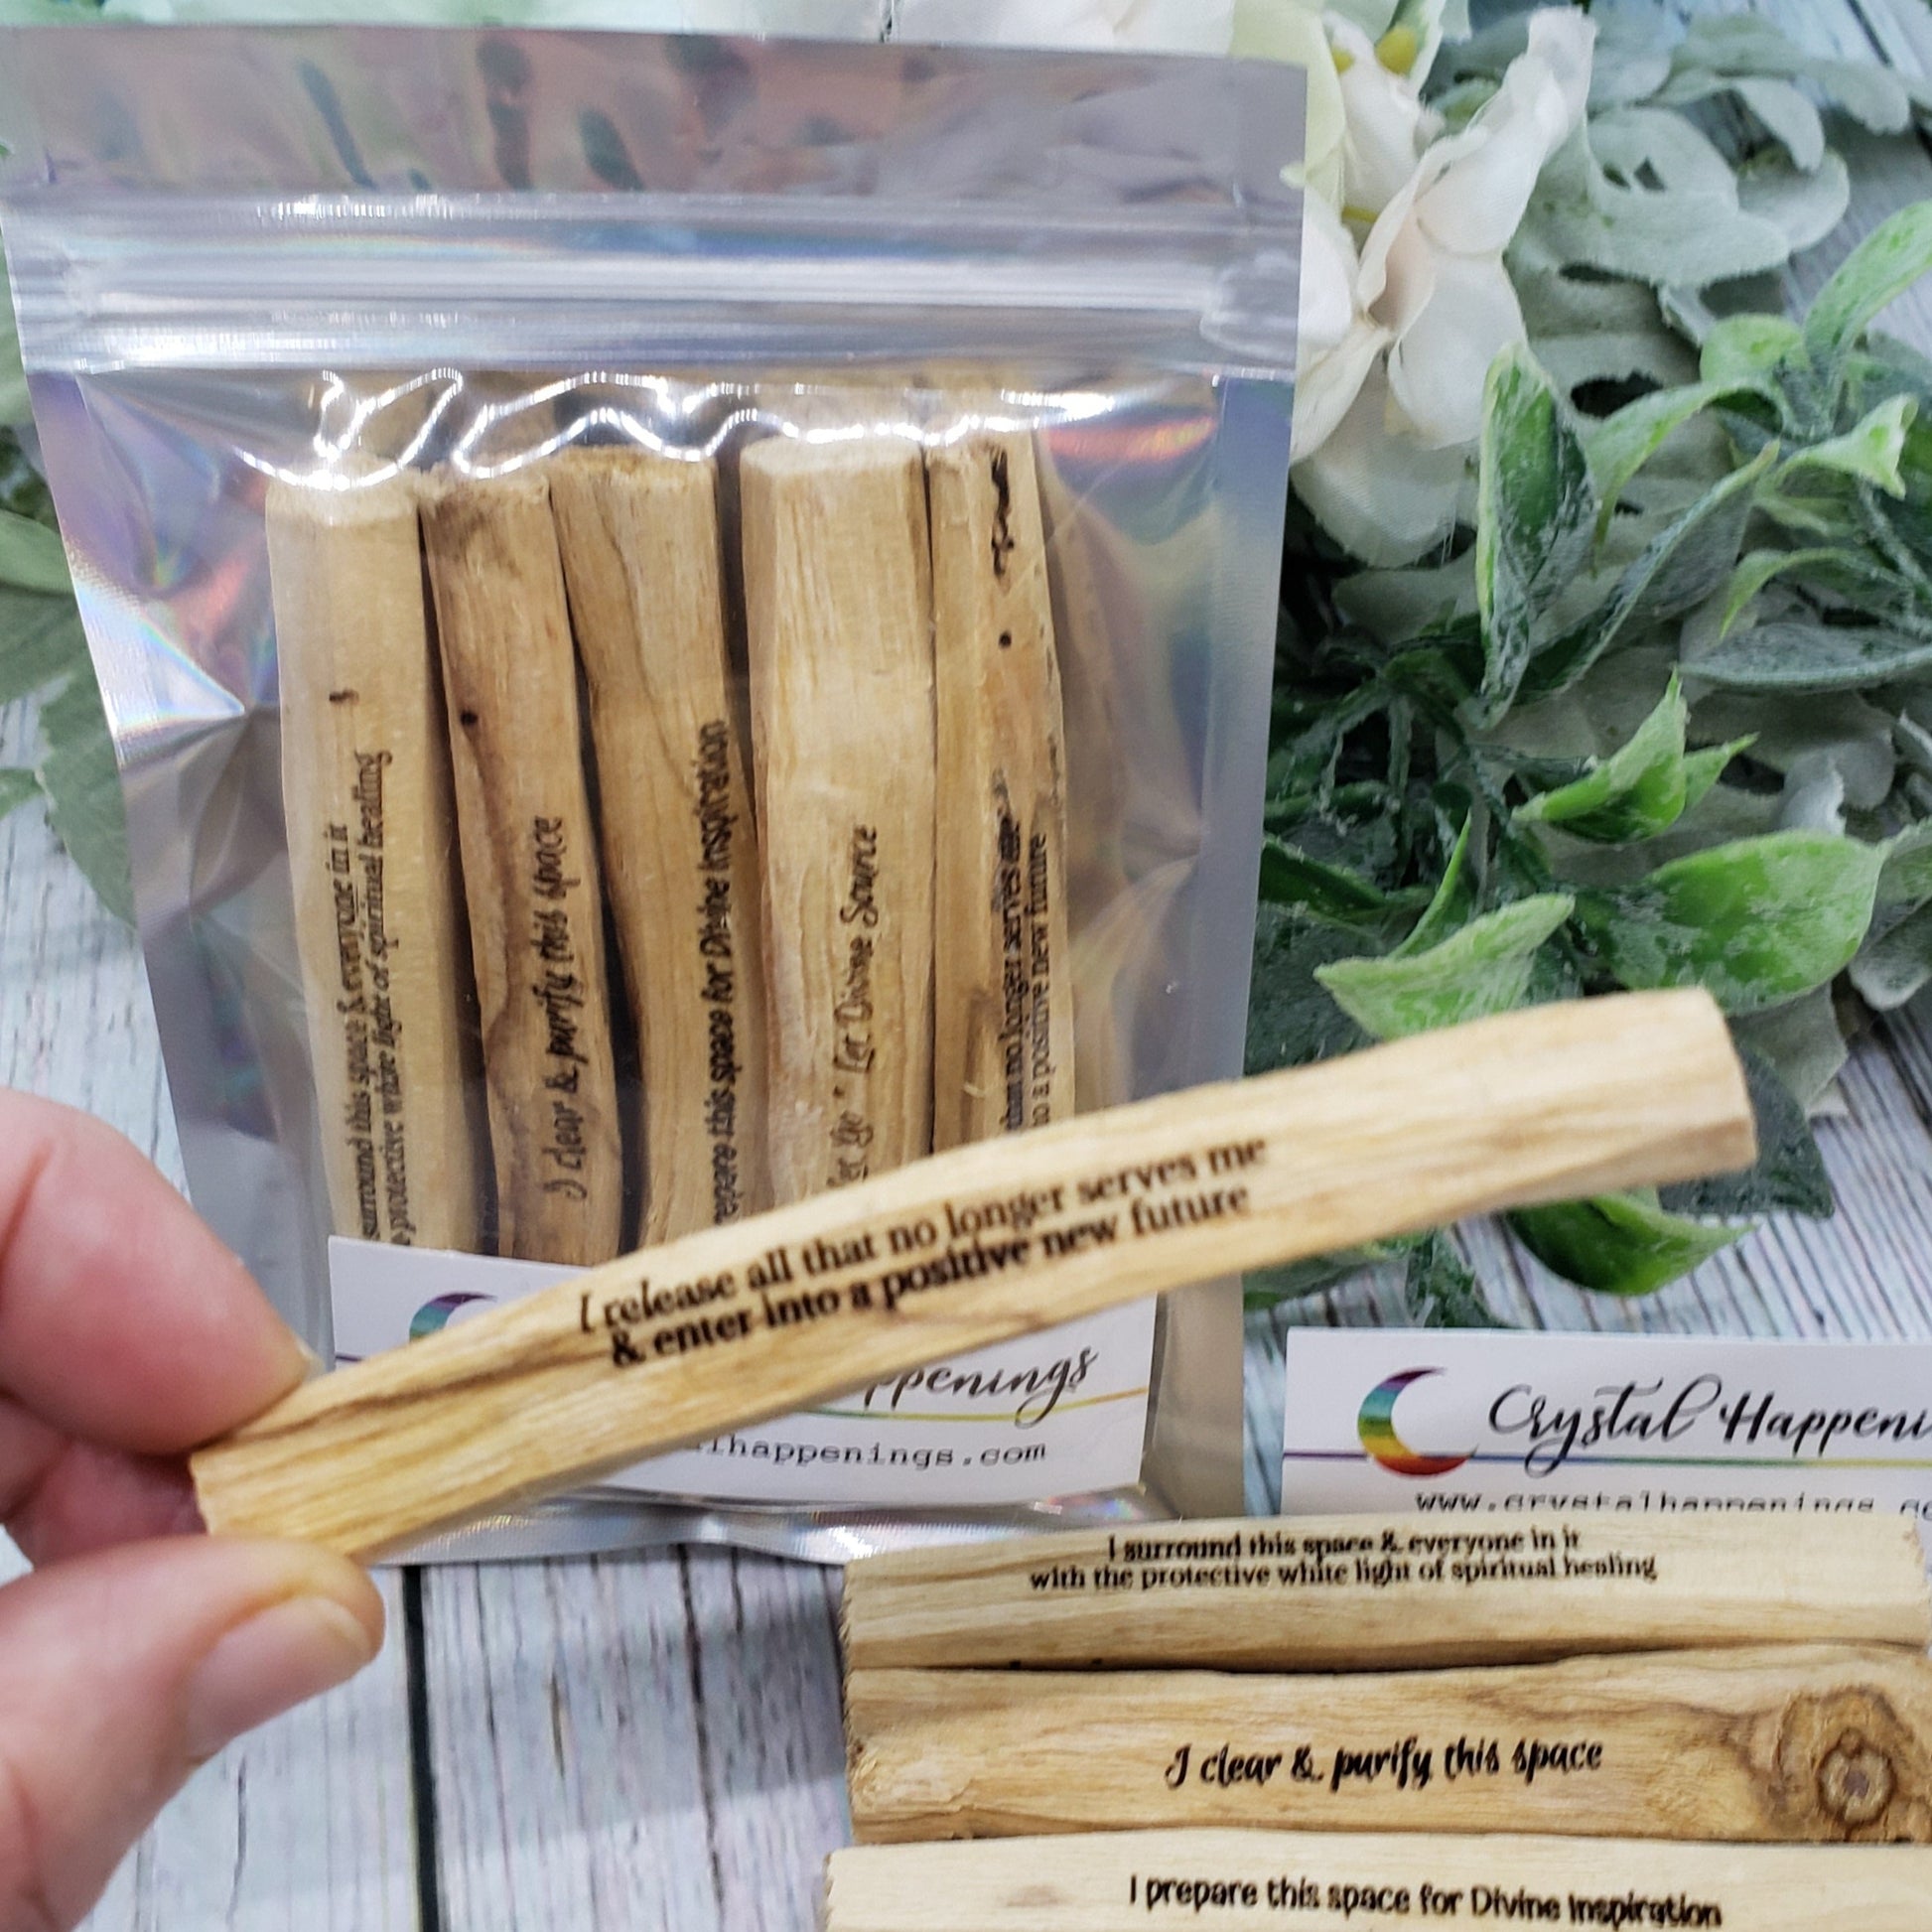 Female Hand Holding one Palo Mantra stick in front of packaged and loose Palo Mantra Gift Set